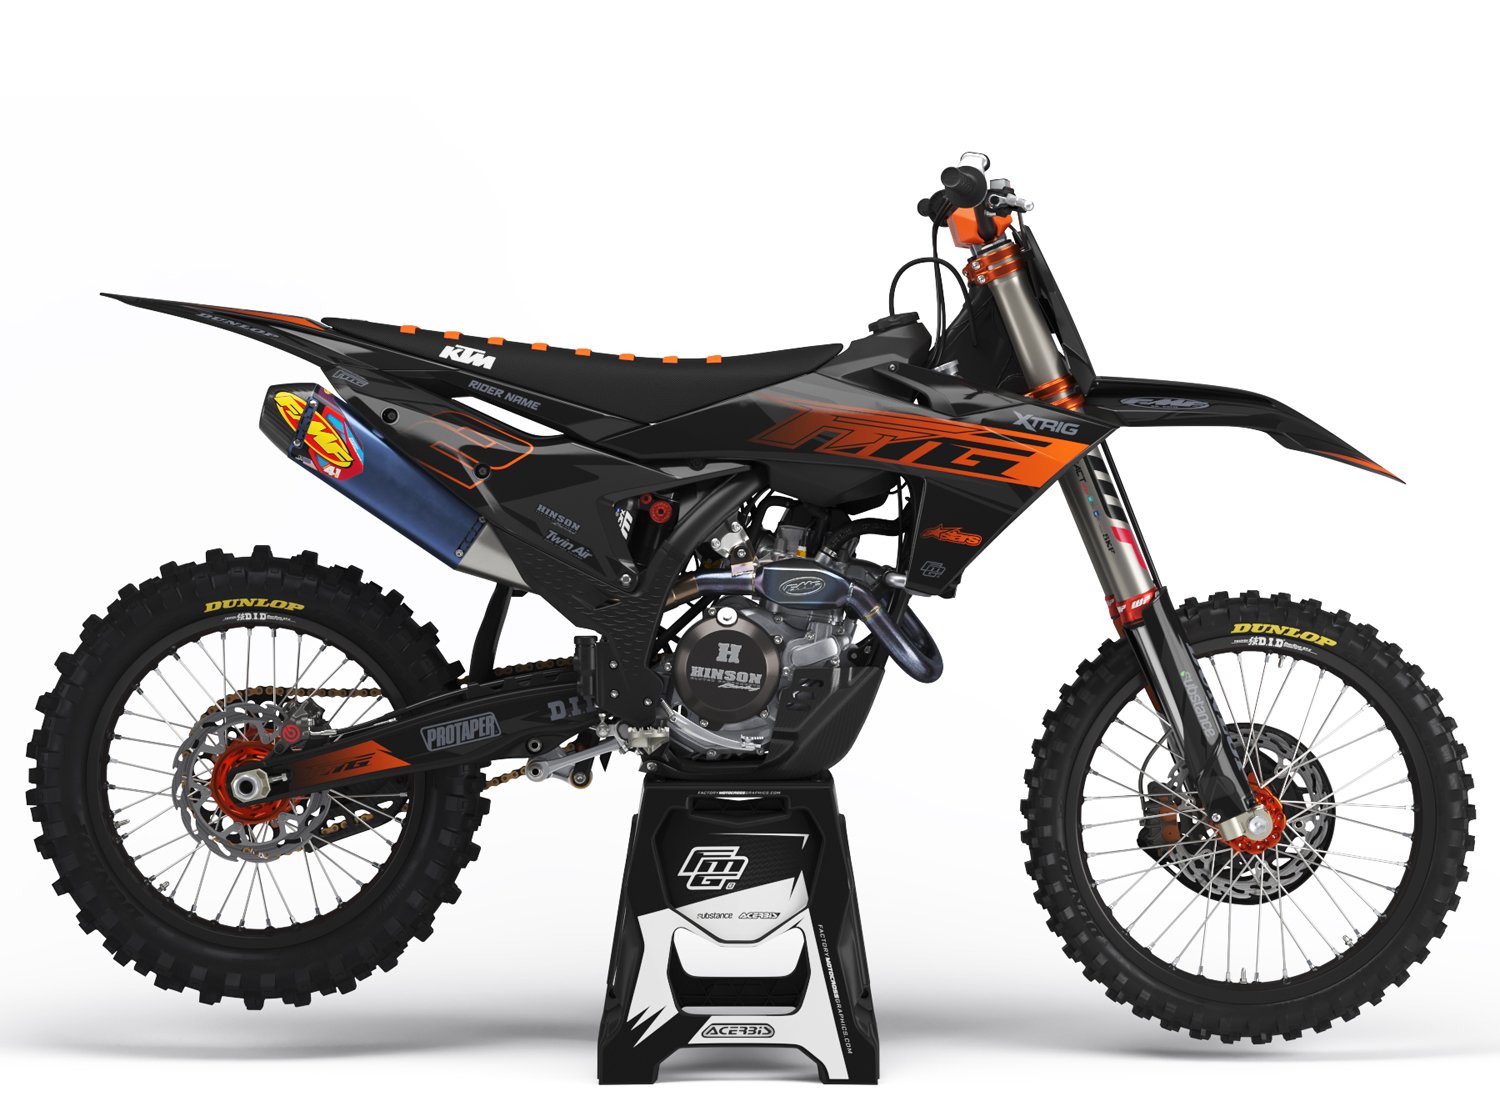 Factory Motocross Graphics: Elevating Your Riding Style with KTM Graphics